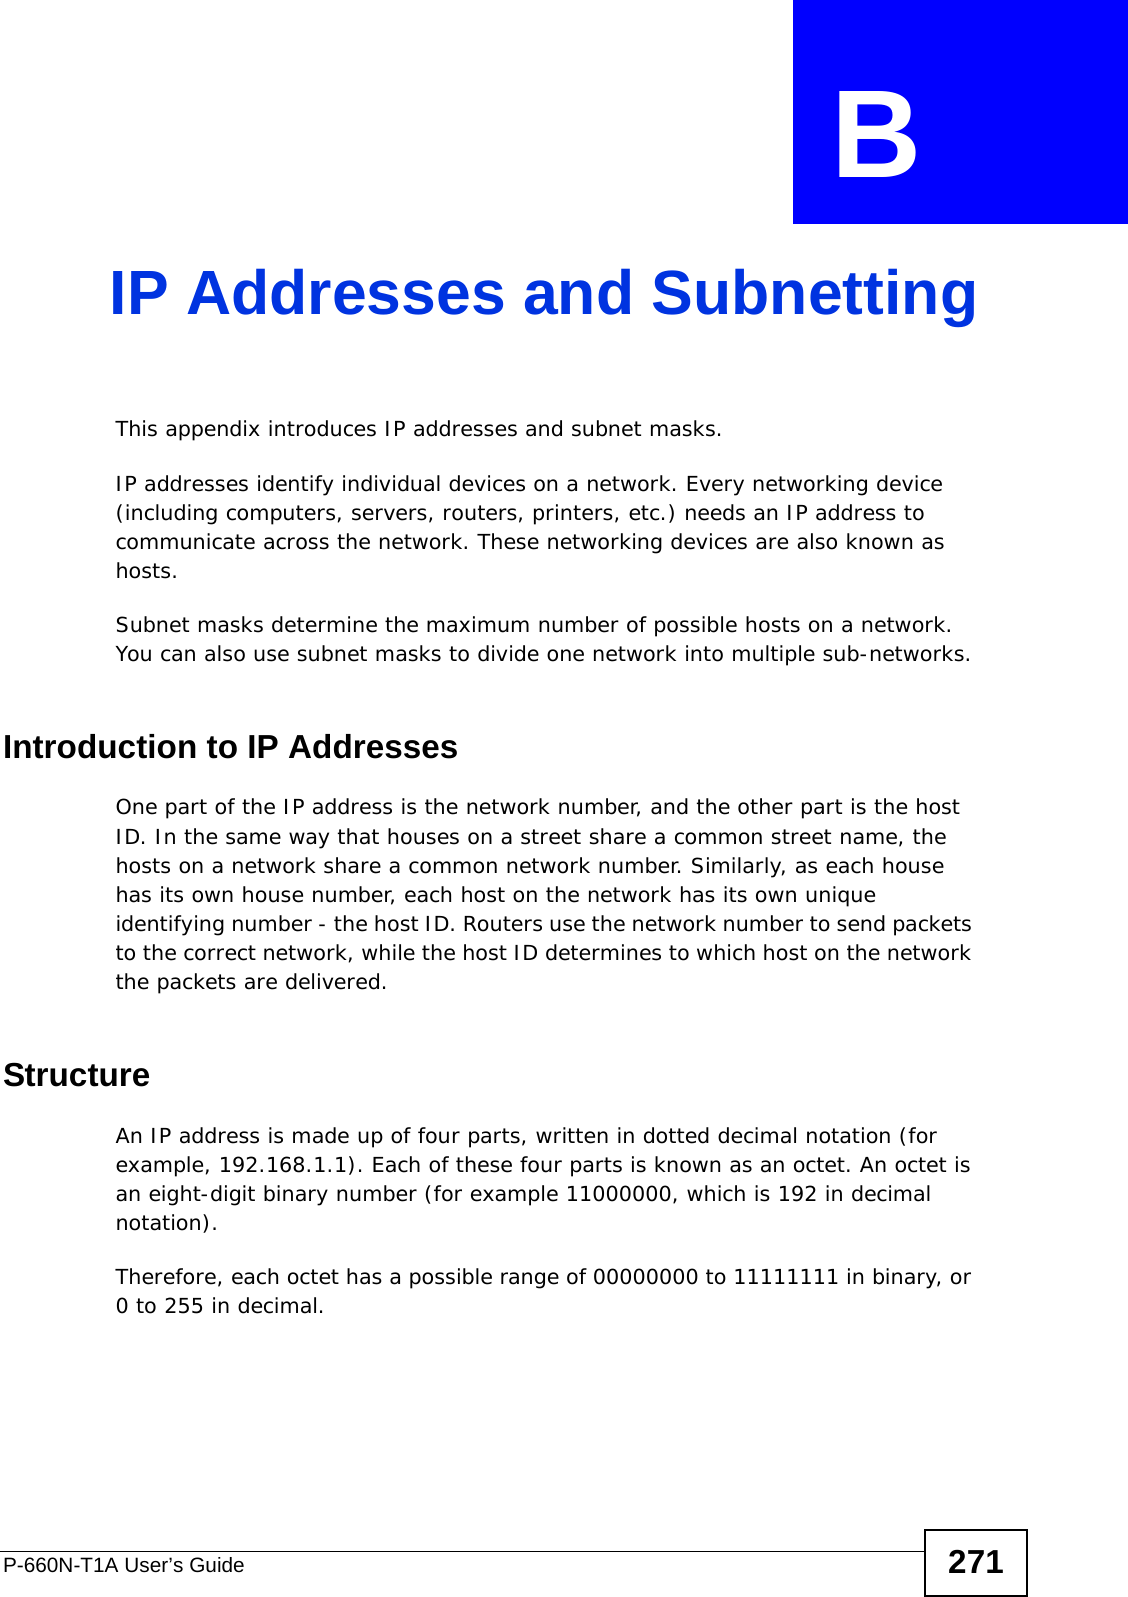 P-660N-T1A User’s Guide 271APPENDIX  B IP Addresses and SubnettingThis appendix introduces IP addresses and subnet masks. IP addresses identify individual devices on a network. Every networking device (including computers, servers, routers, printers, etc.) needs an IP address to communicate across the network. These networking devices are also known as hosts.Subnet masks determine the maximum number of possible hosts on a network. You can also use subnet masks to divide one network into multiple sub-networks.Introduction to IP AddressesOne part of the IP address is the network number, and the other part is the host ID. In the same way that houses on a street share a common street name, the hosts on a network share a common network number. Similarly, as each house has its own house number, each host on the network has its own unique identifying number - the host ID. Routers use the network number to send packets to the correct network, while the host ID determines to which host on the network the packets are delivered.StructureAn IP address is made up of four parts, written in dotted decimal notation (for example, 192.168.1.1). Each of these four parts is known as an octet. An octet is an eight-digit binary number (for example 11000000, which is 192 in decimal notation). Therefore, each octet has a possible range of 00000000 to 11111111 in binary, or 0 to 255 in decimal.